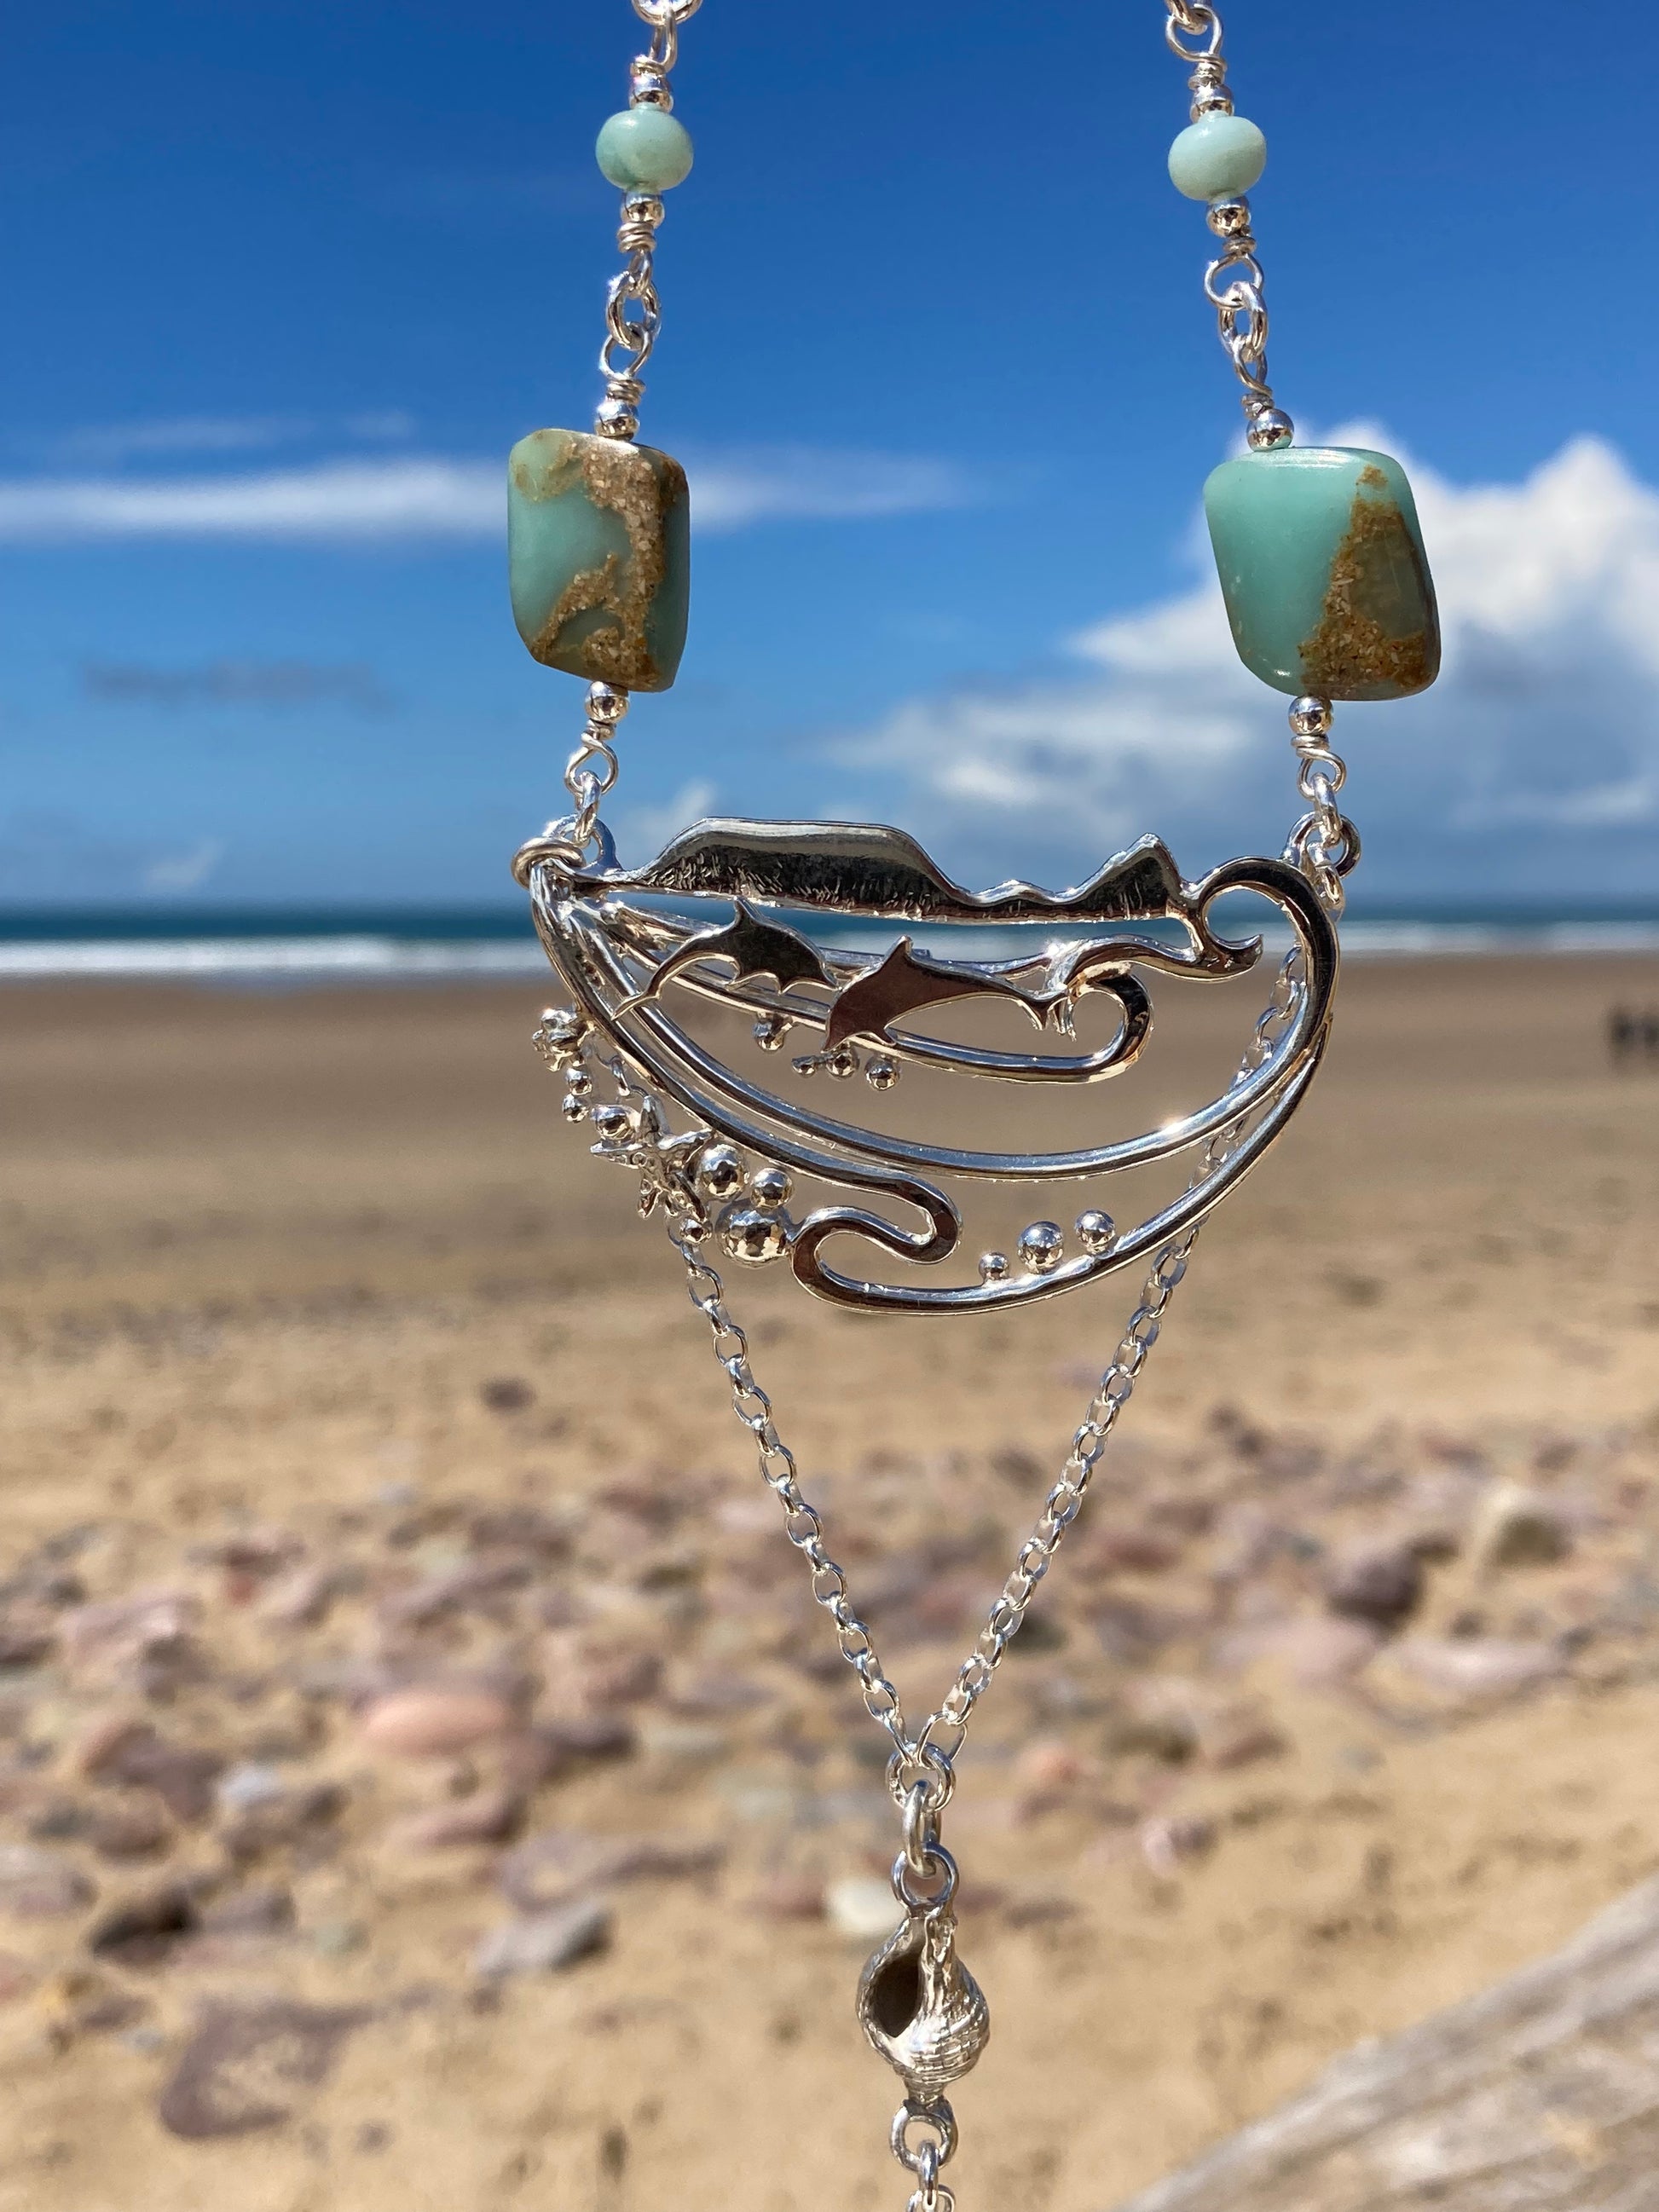 Dolphins necklace at Worm's Head Gower